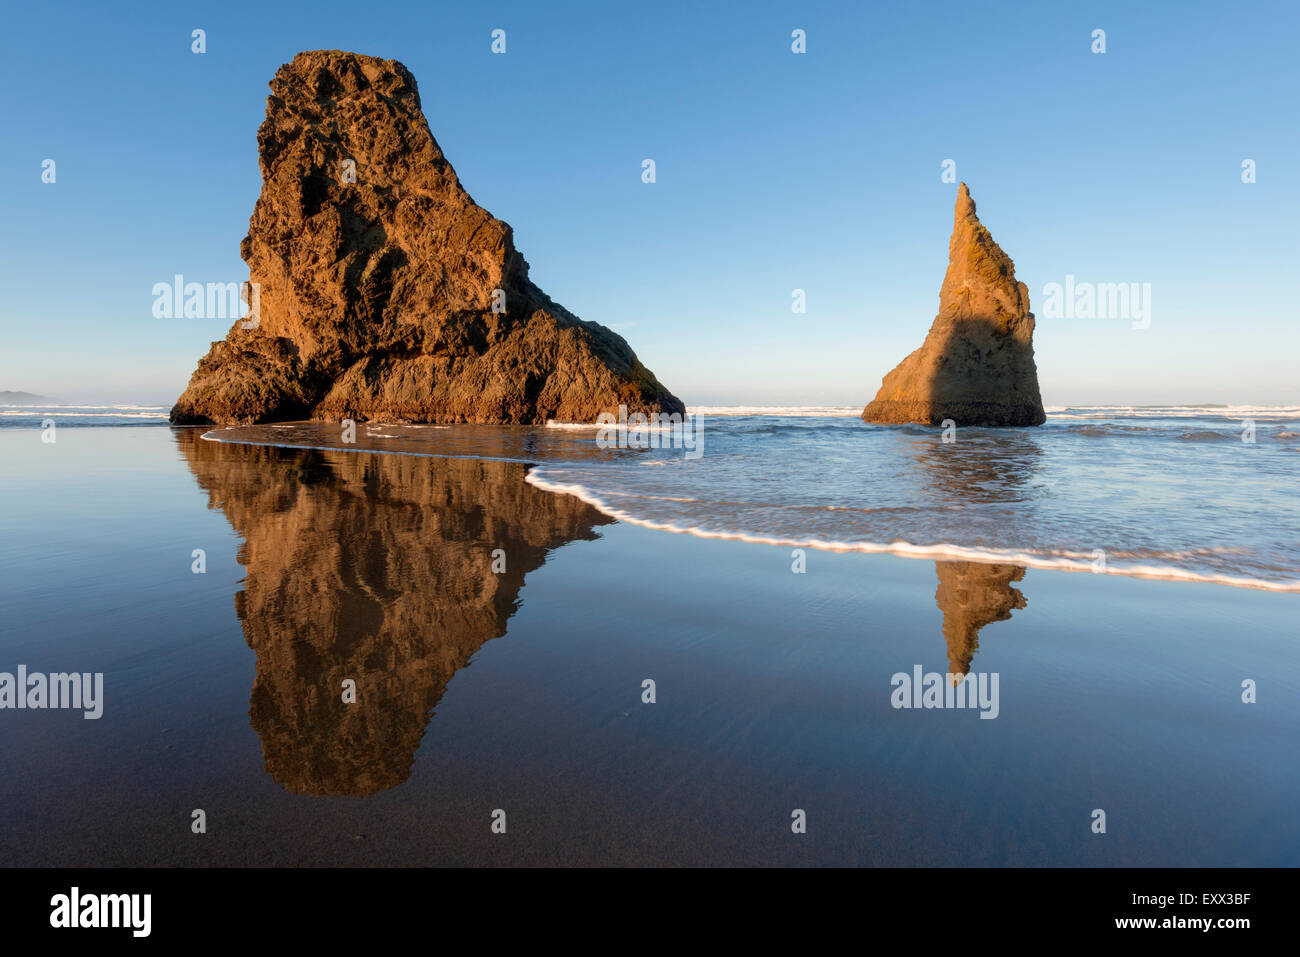 Rock formations on beach Banque D'Images